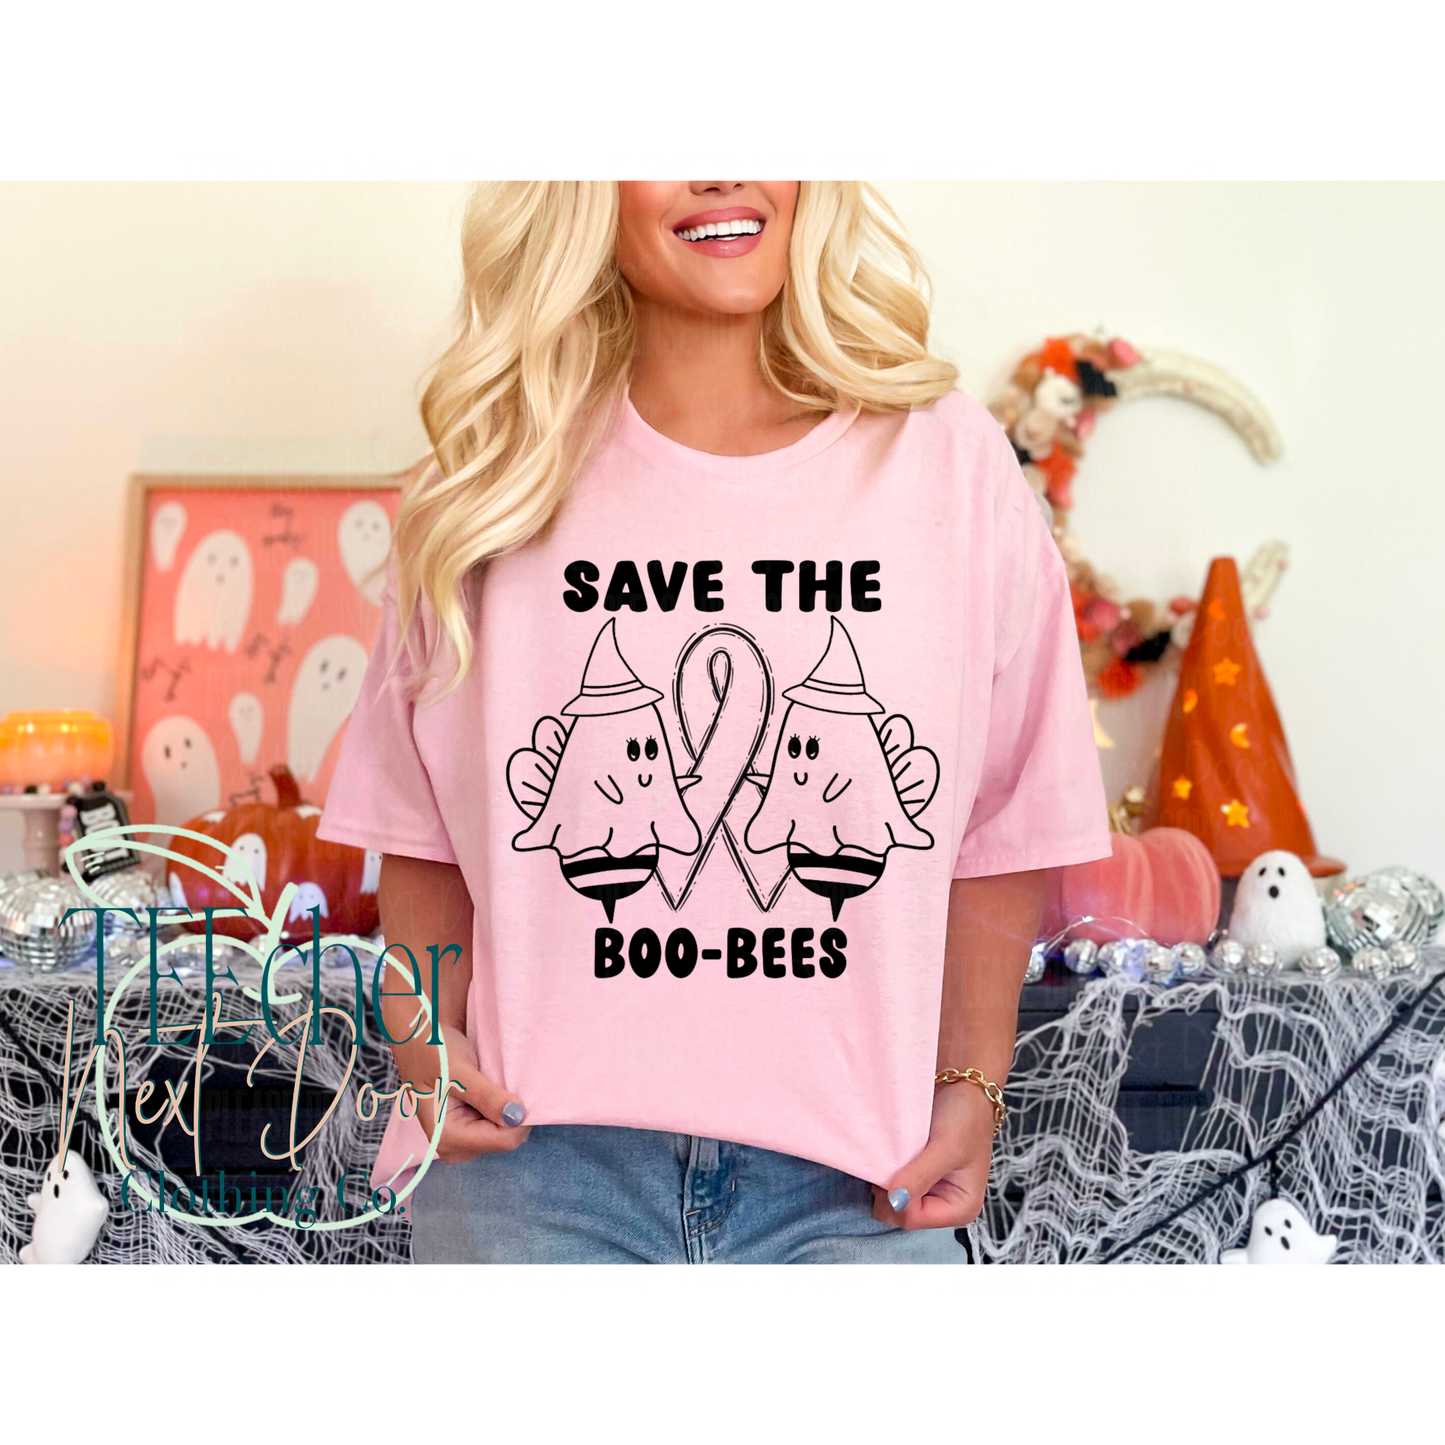 Save the BOO-BEES!